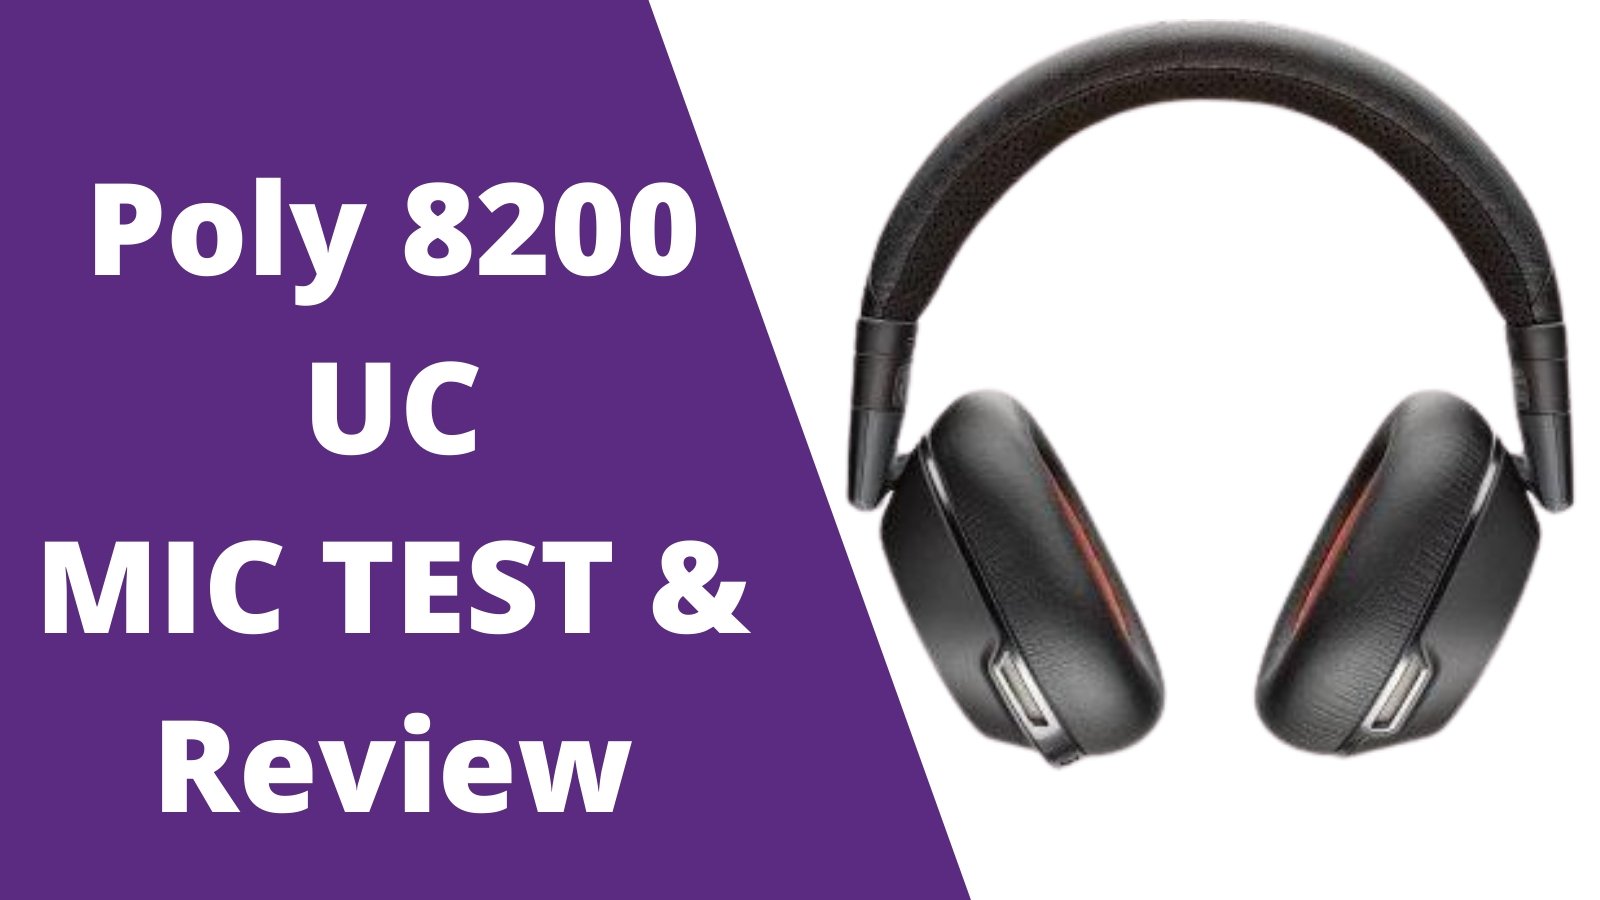 MIC TEST & Review of Poly 8200 UC Bluetooth Wireless Headset - Noise Cancelling Headphones (ANC) - 208769-01 - Headset Advisor